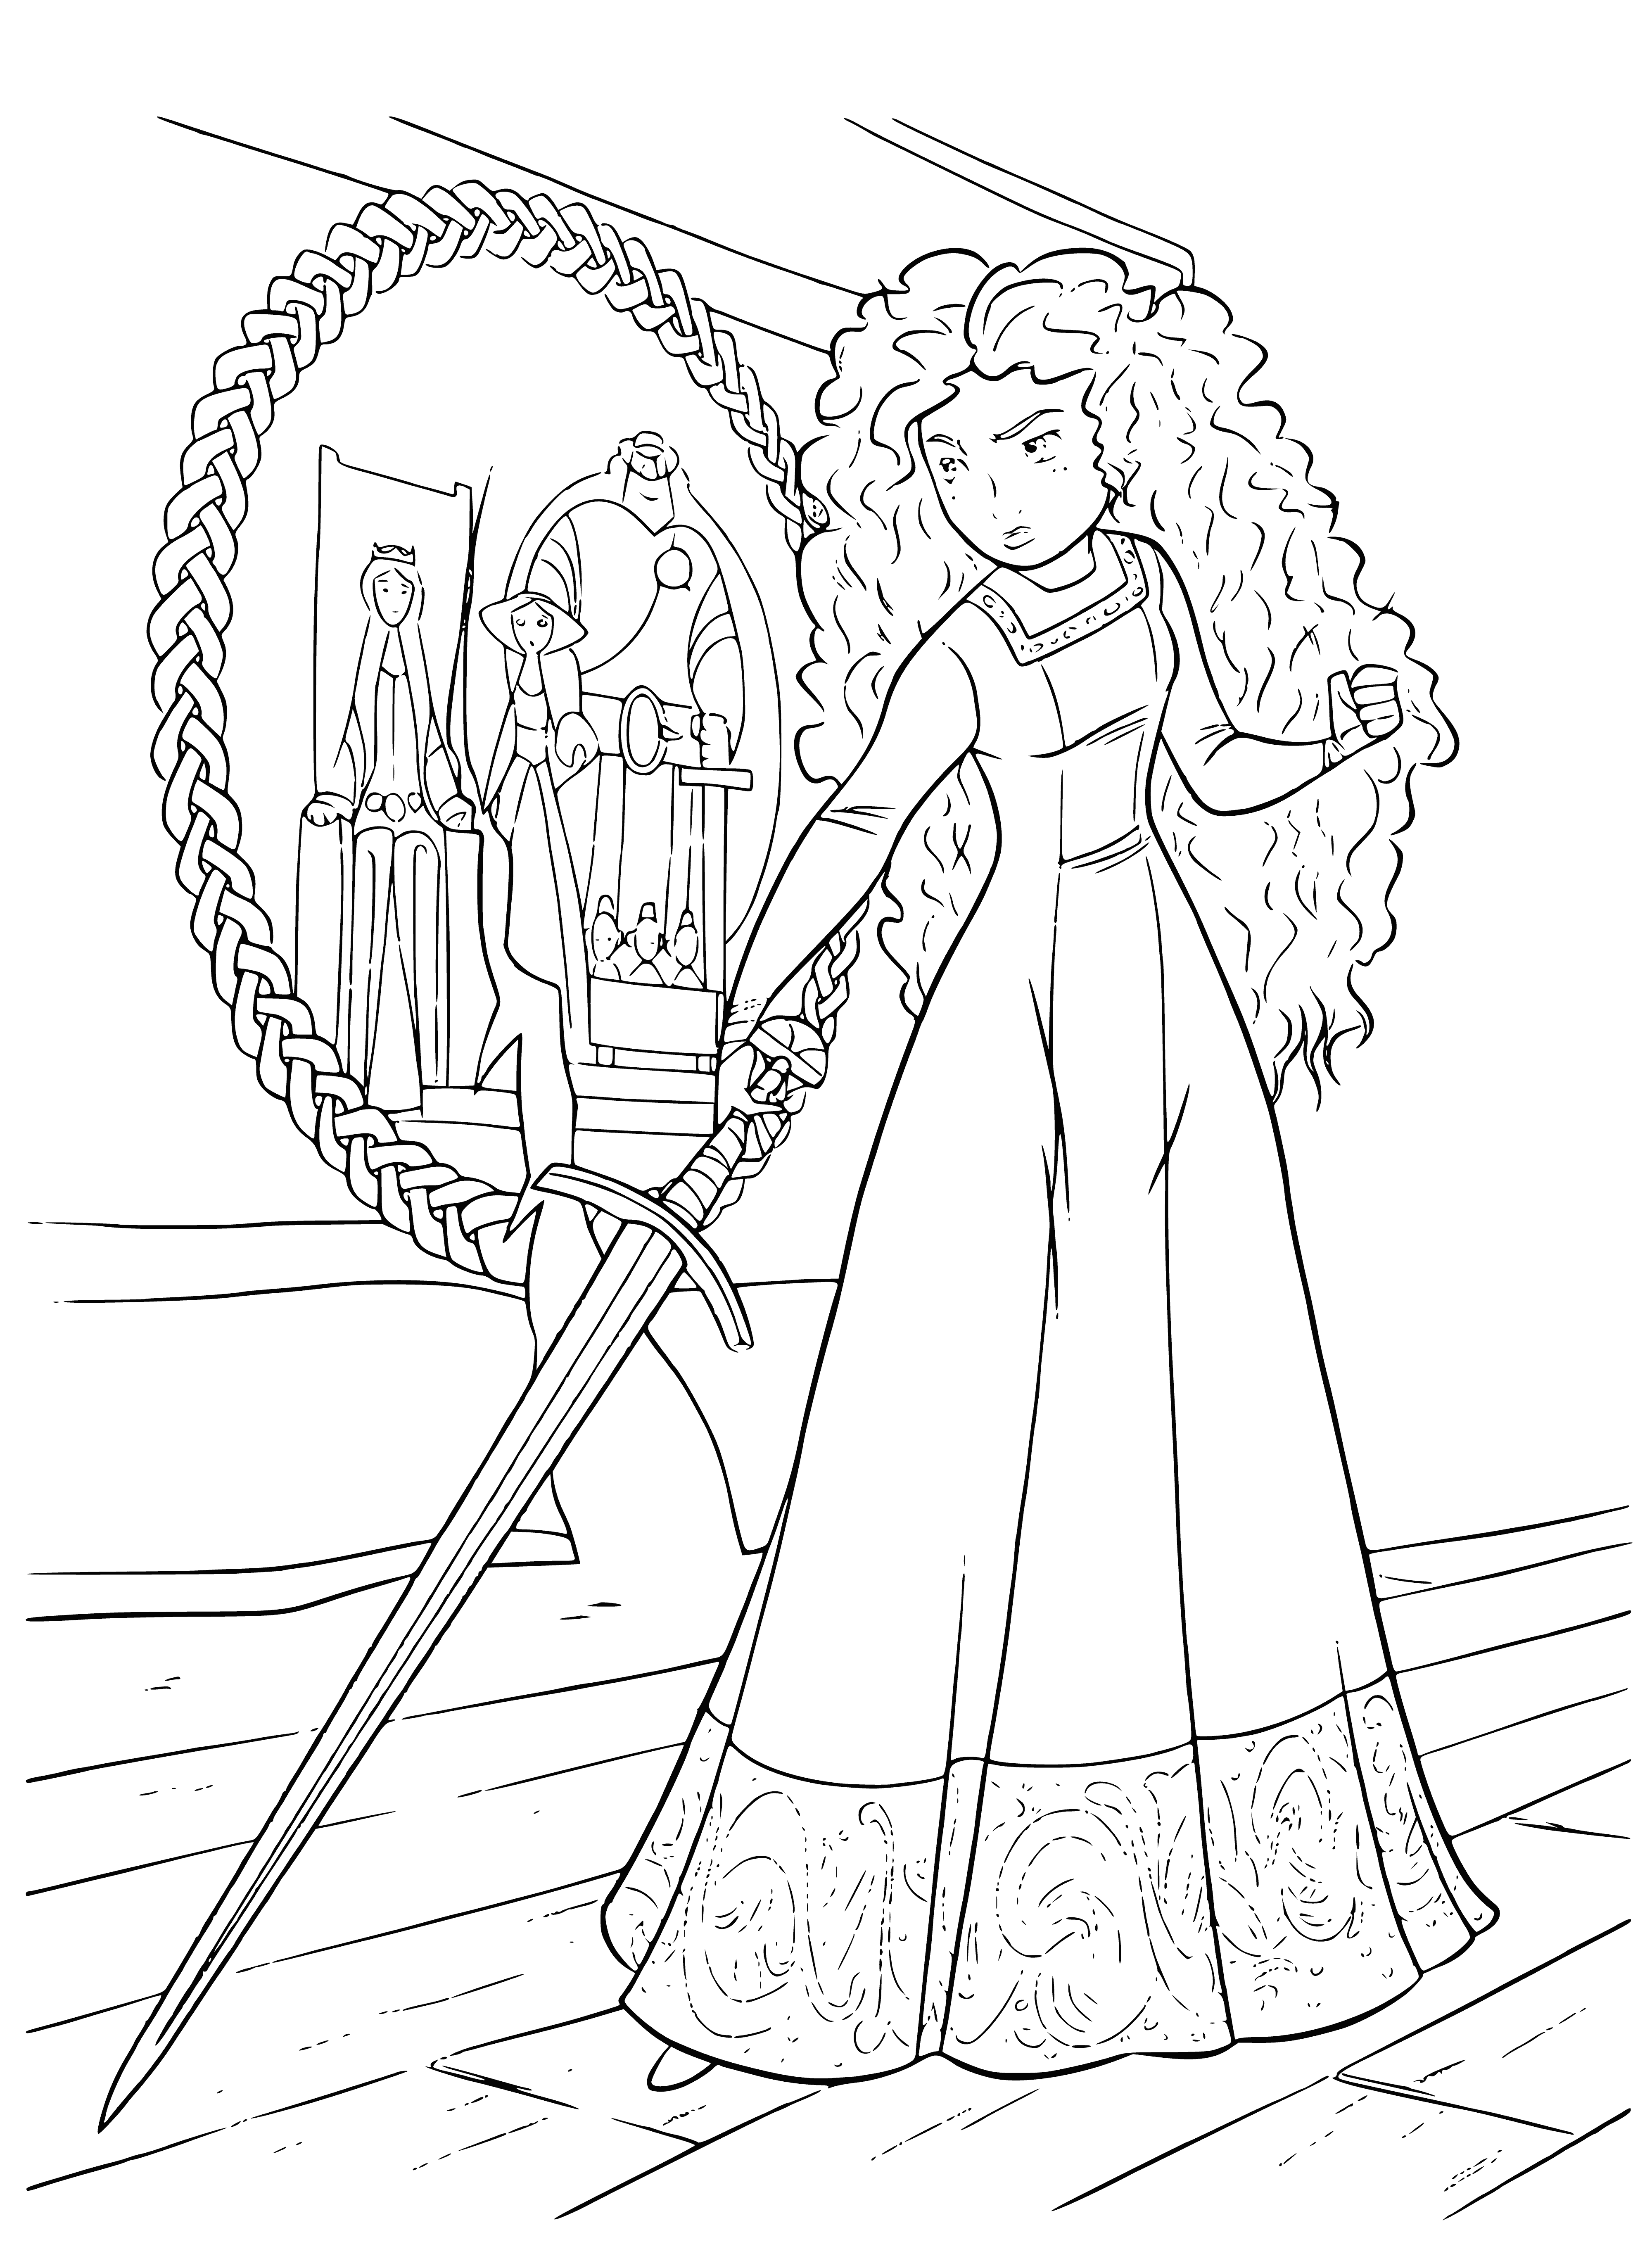 coloring page: Young woman with red hair and blue dress holding a sword stands before castle on a hill, forest in background, blue sky.